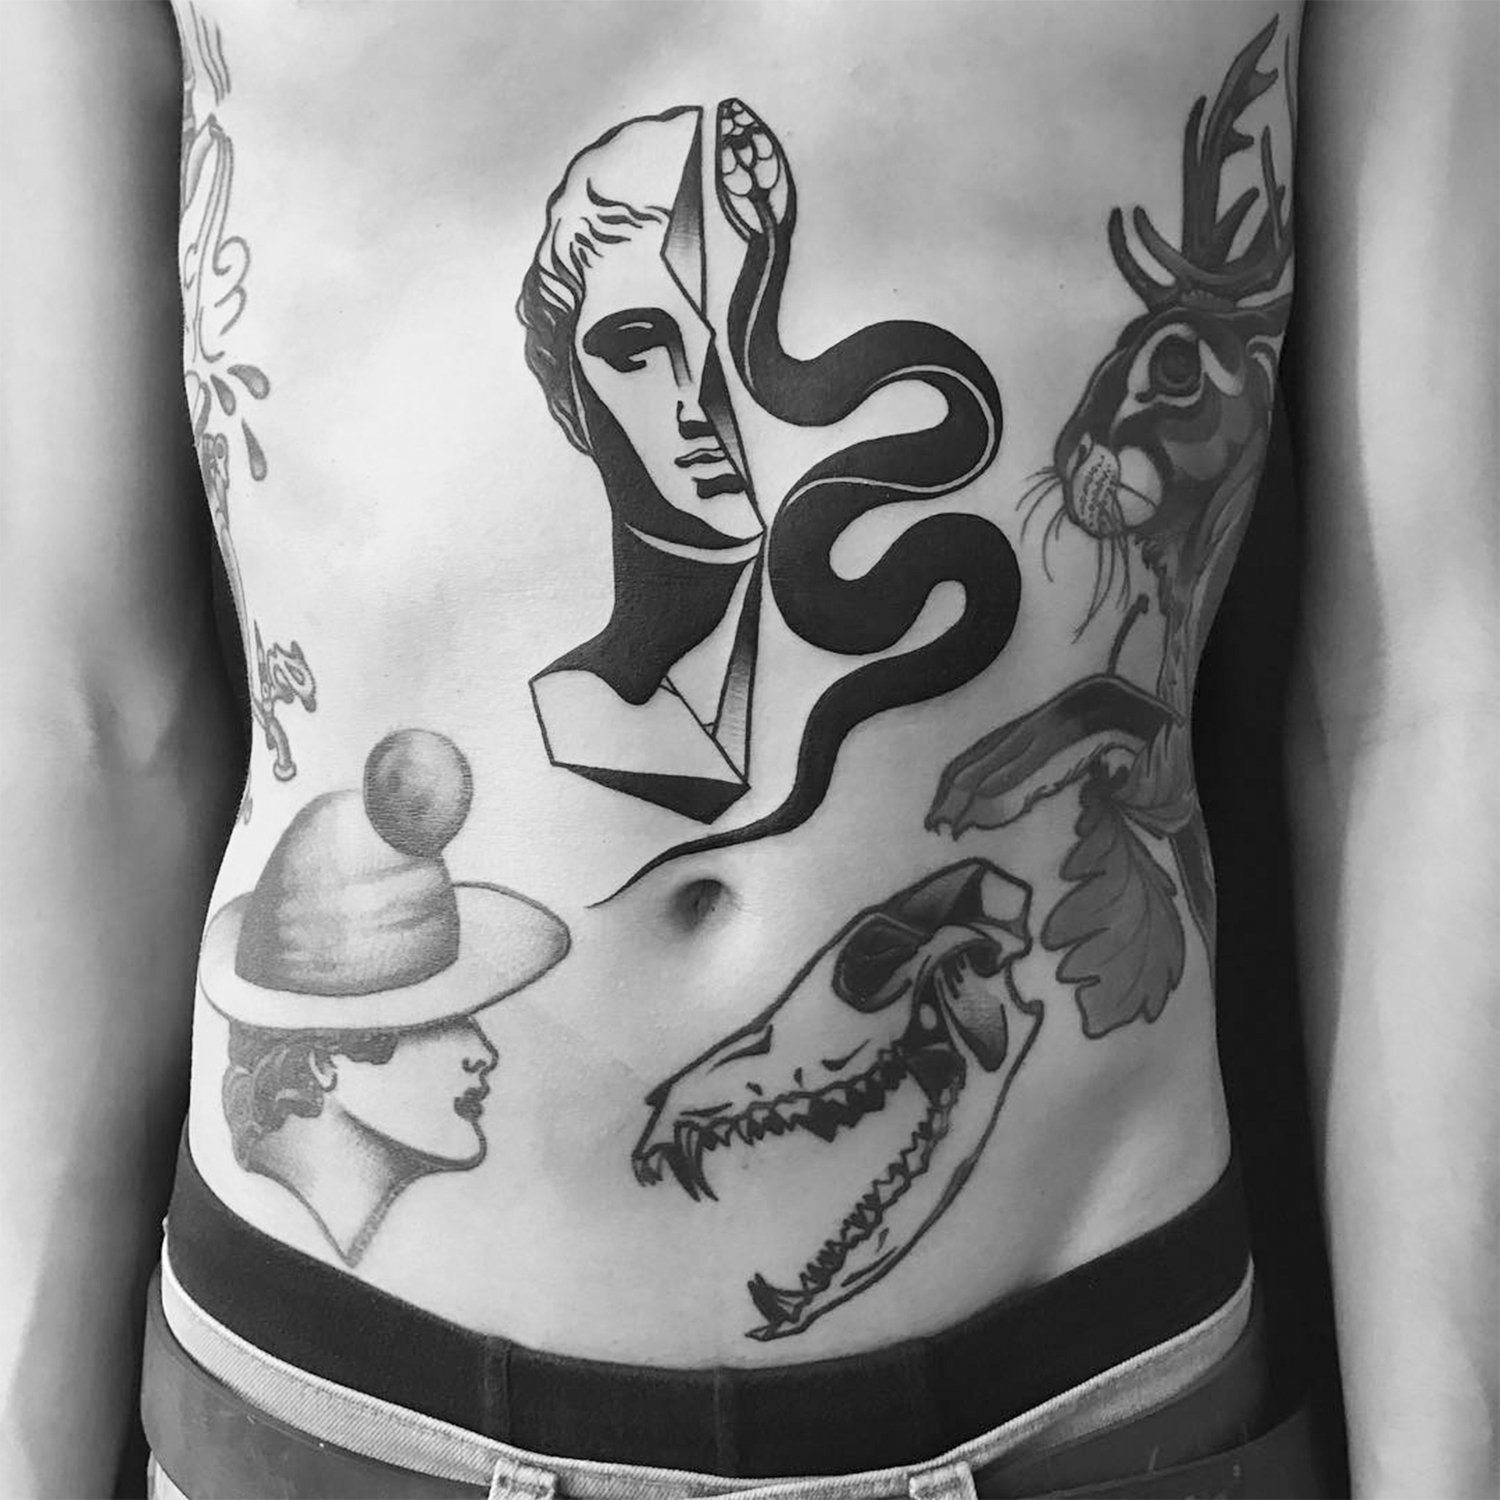 female figure and snake, on body